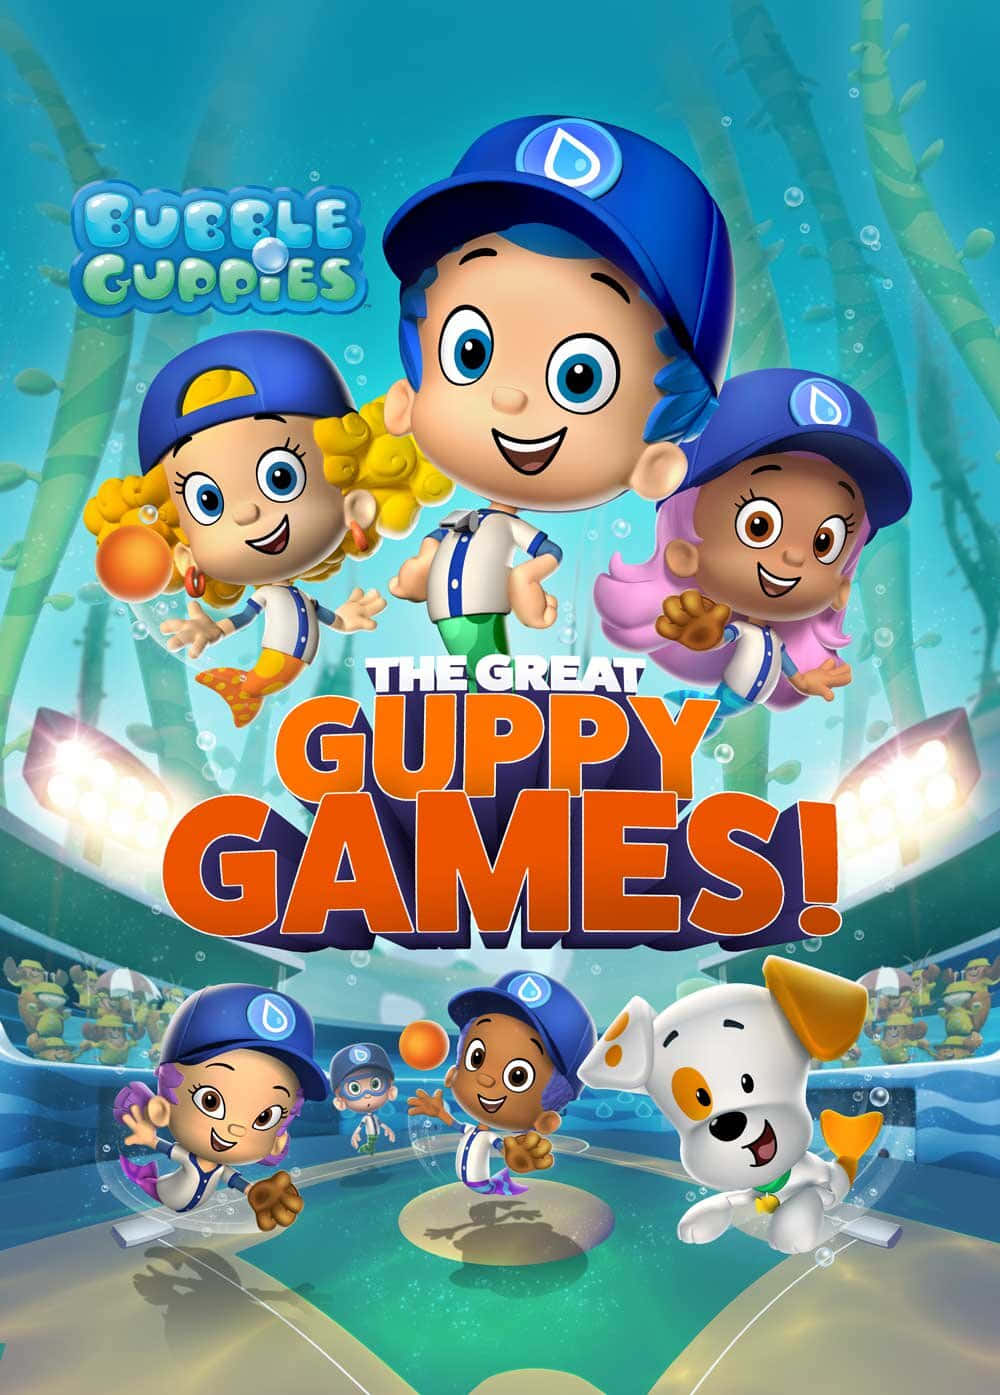 Join Molly, Gil and their Bubble Guppies friends on their adventures full of fun and learning!